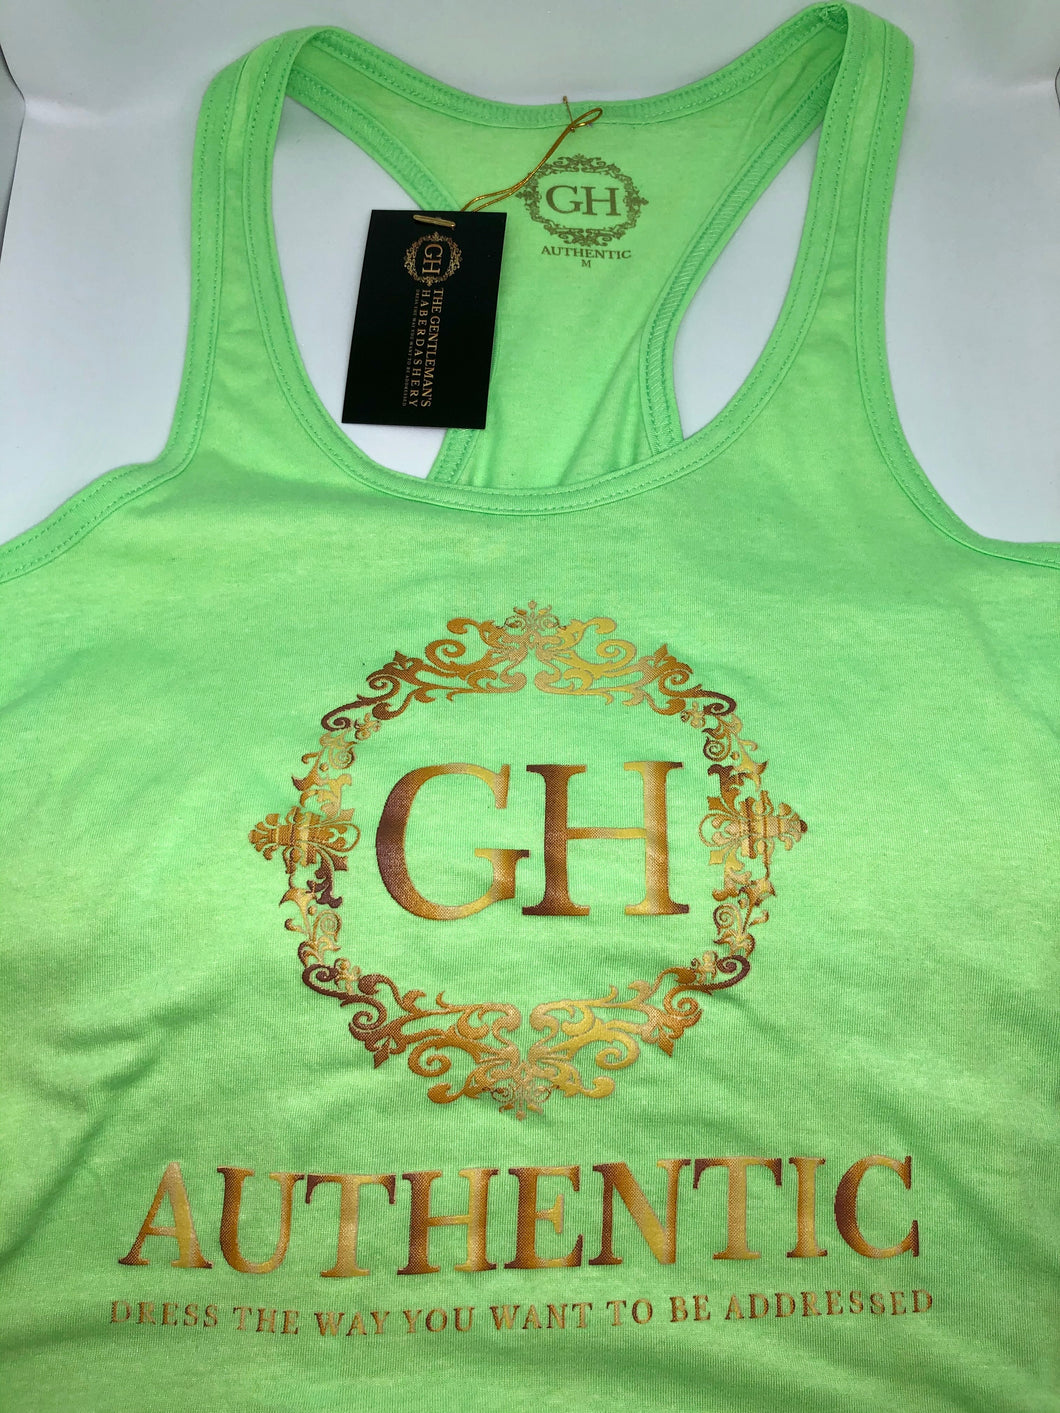 GH Authentic Women's Lime Green Tank Top